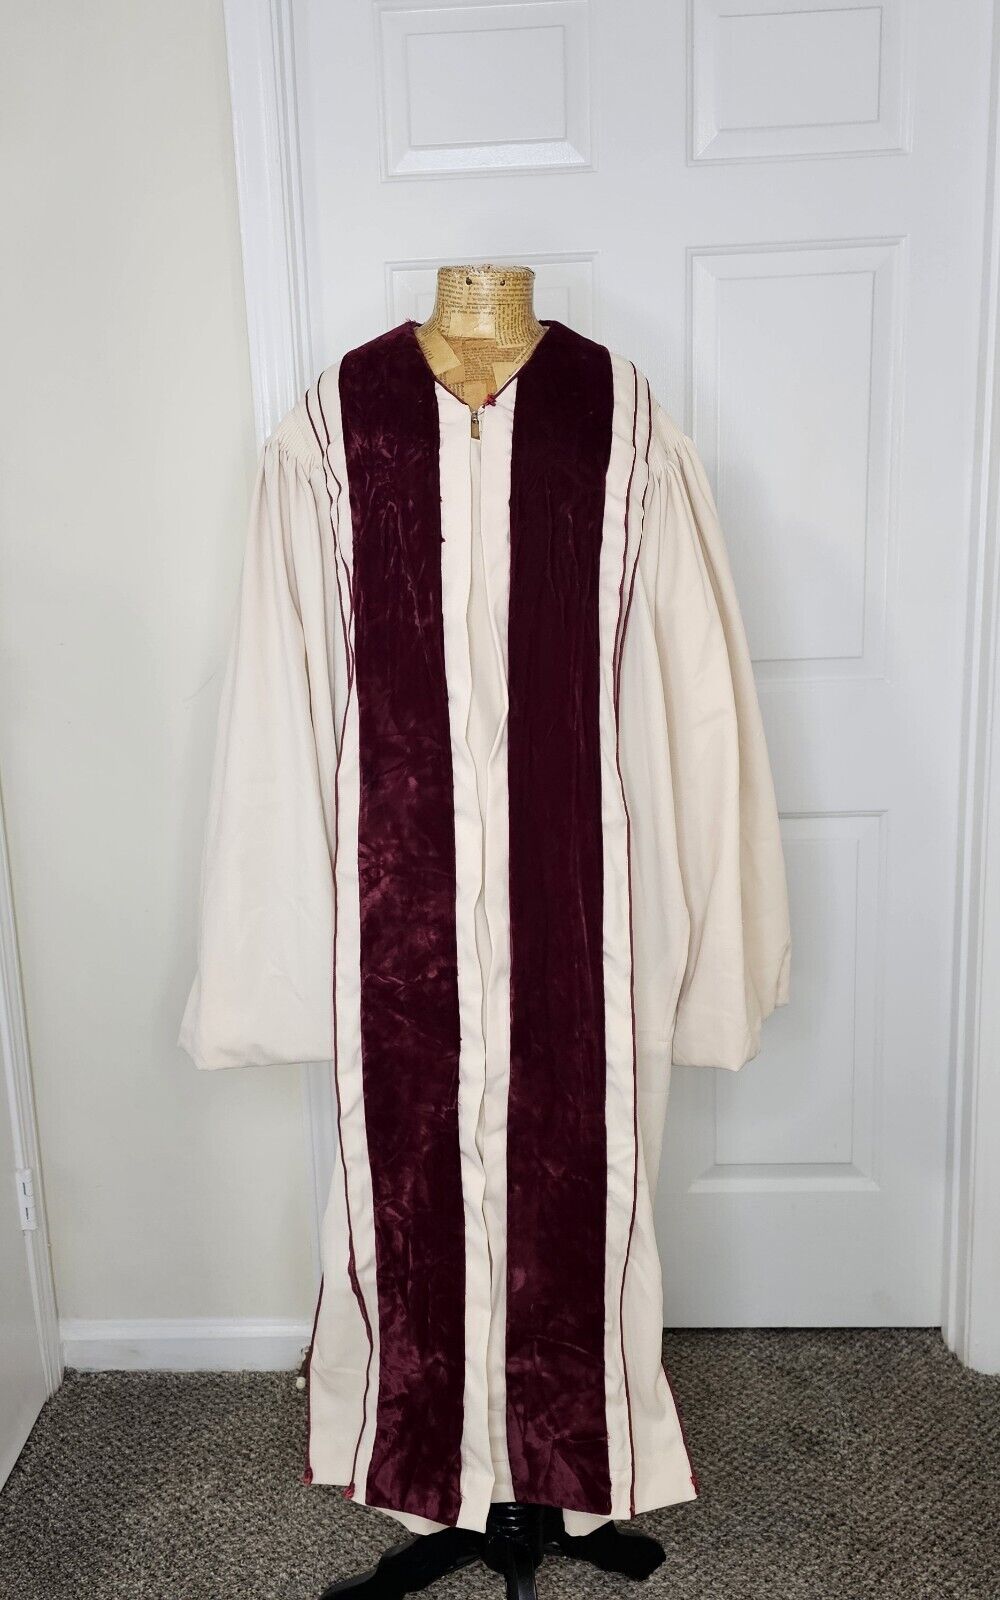 Robe for Apostles, Abbott Hall Church Apparel Of Dignity and Distinction size 57